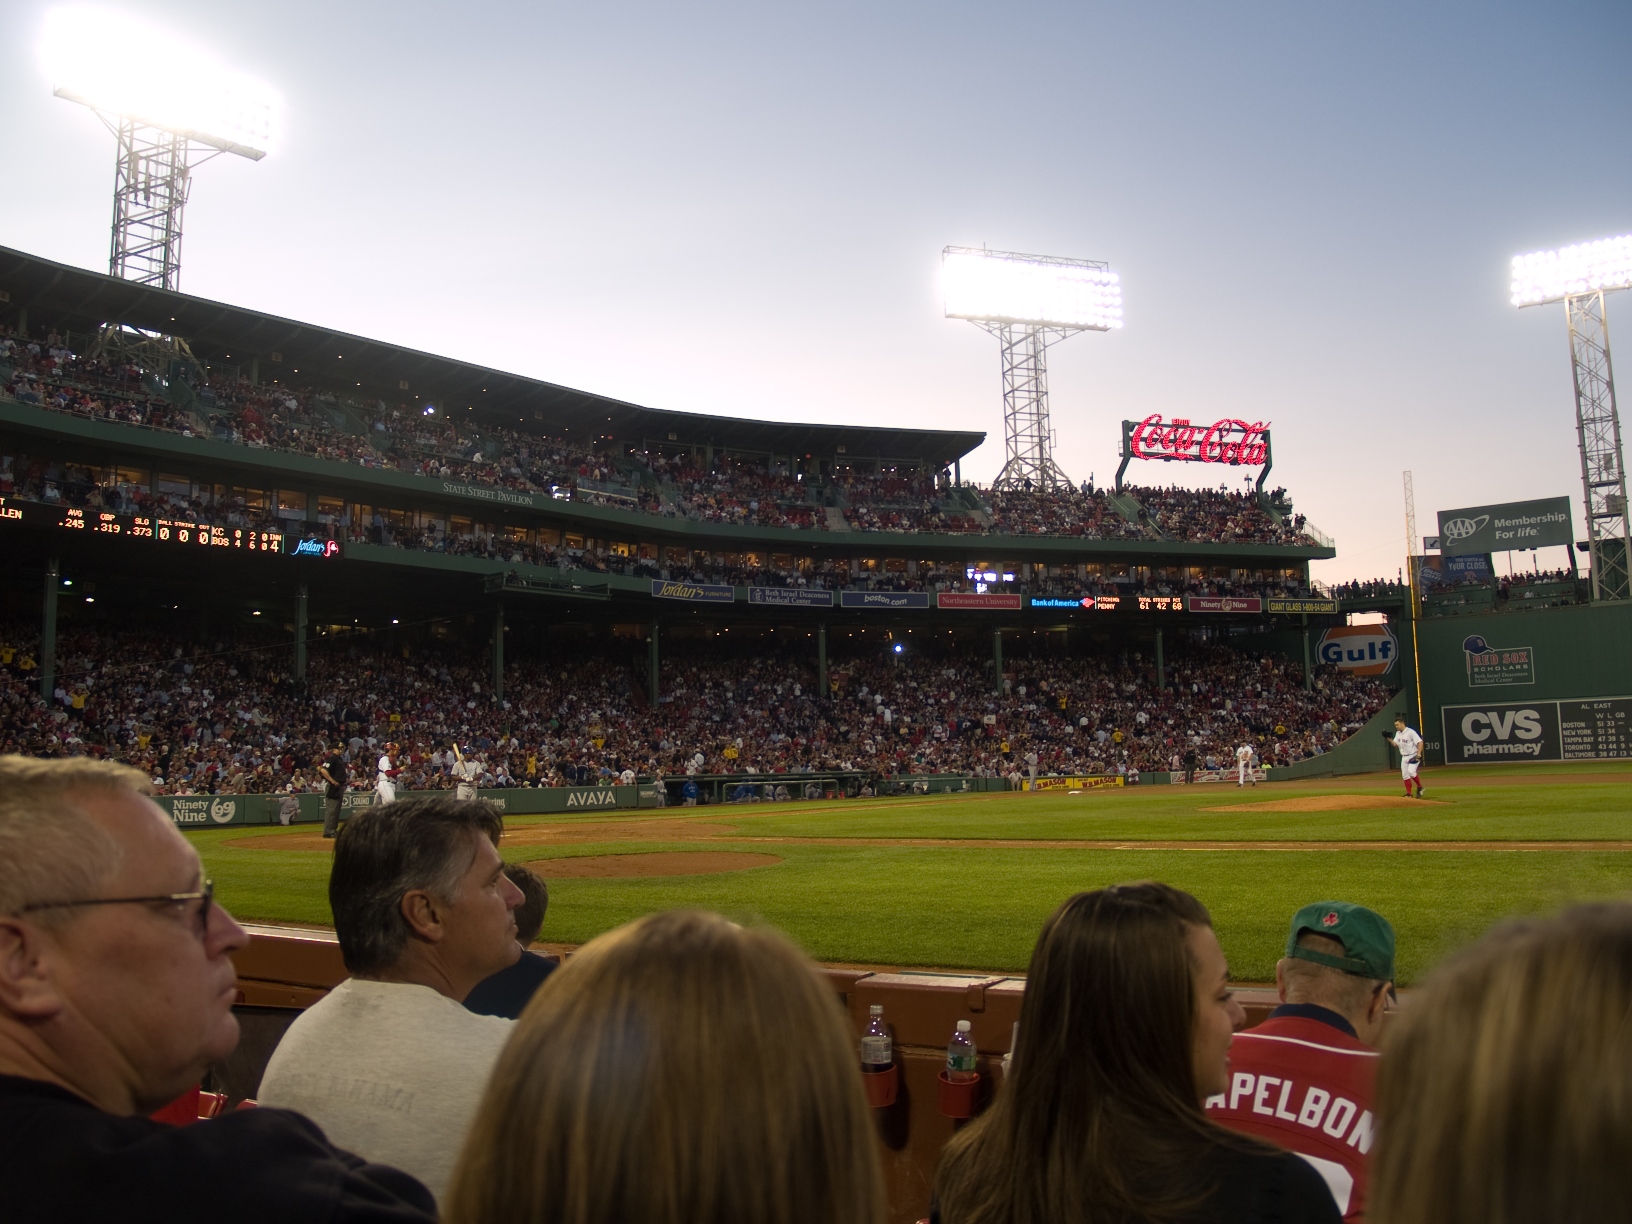 fenway park during a red sox versus kansas city royals game on july 9th 2009